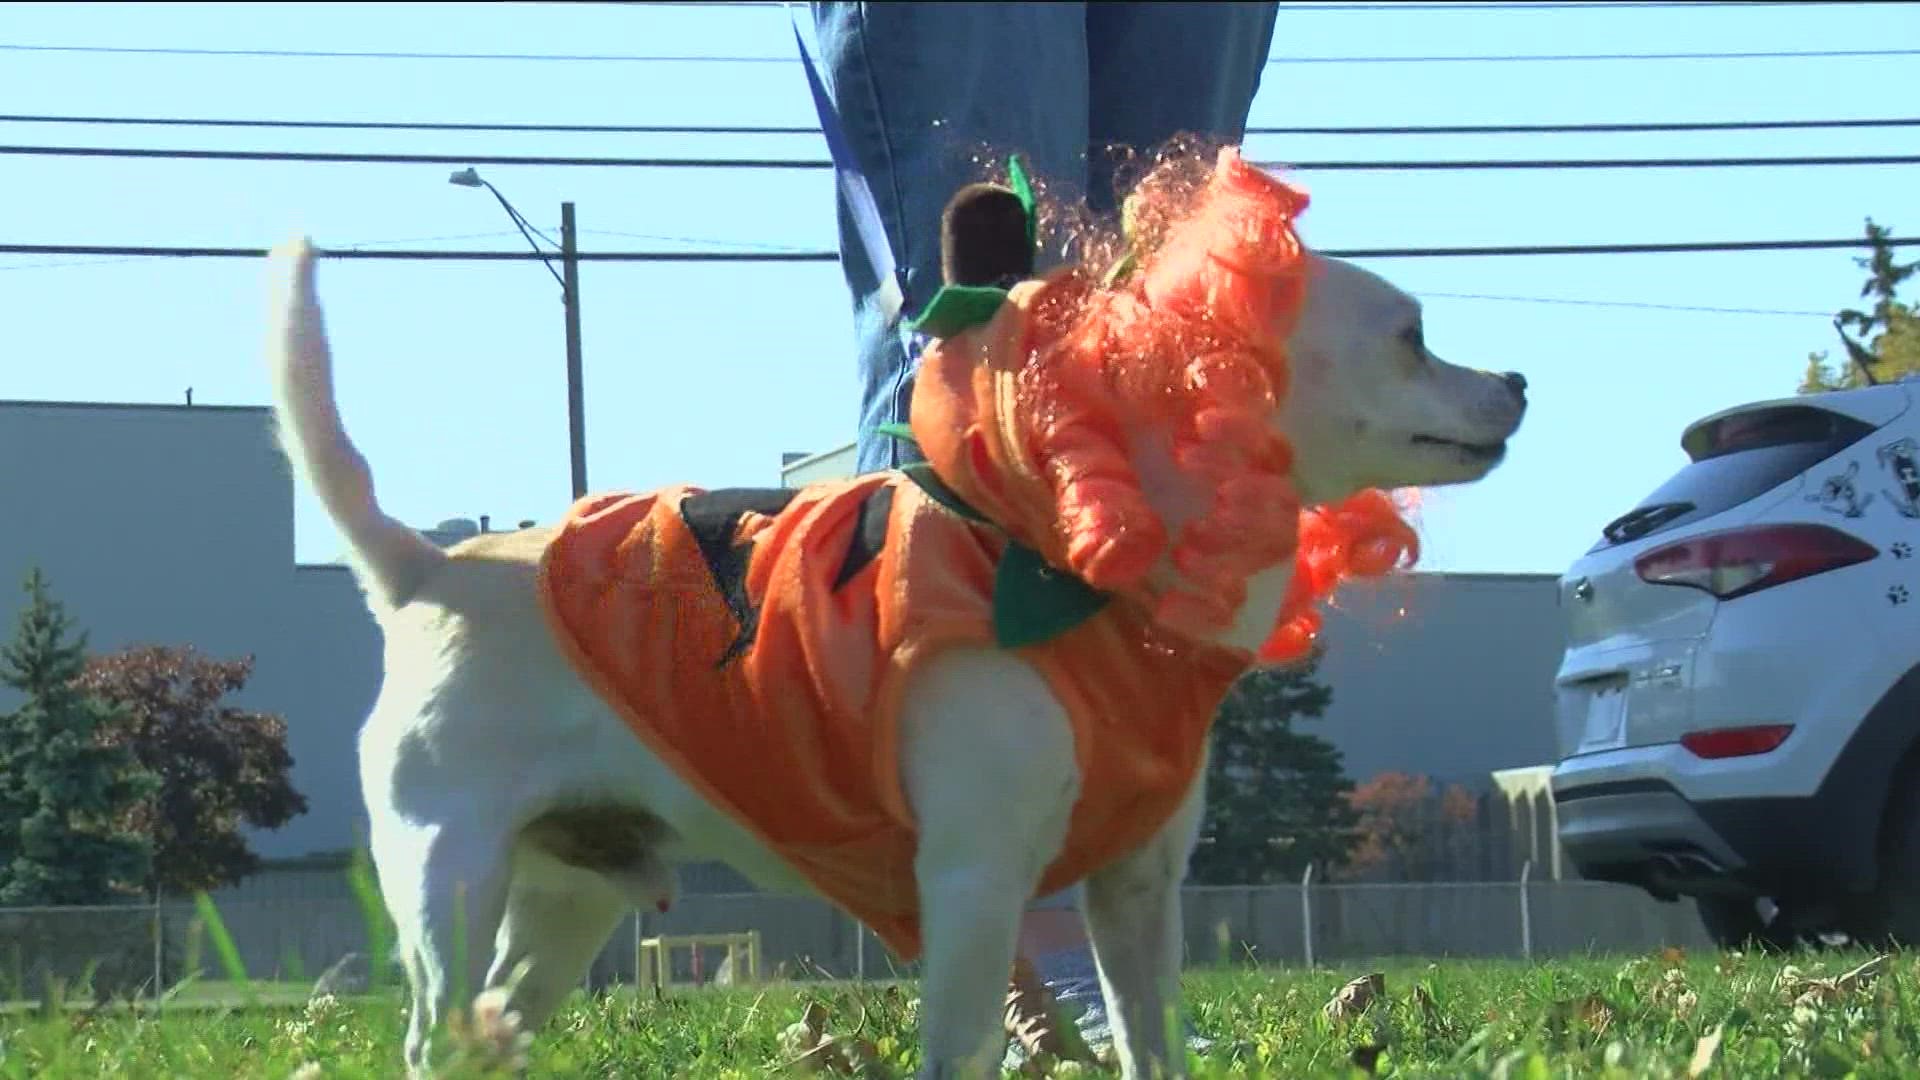 Three Dog Bakery hosted a pet costume contest and parade to benefit the Toledo Humane Society Saturday.